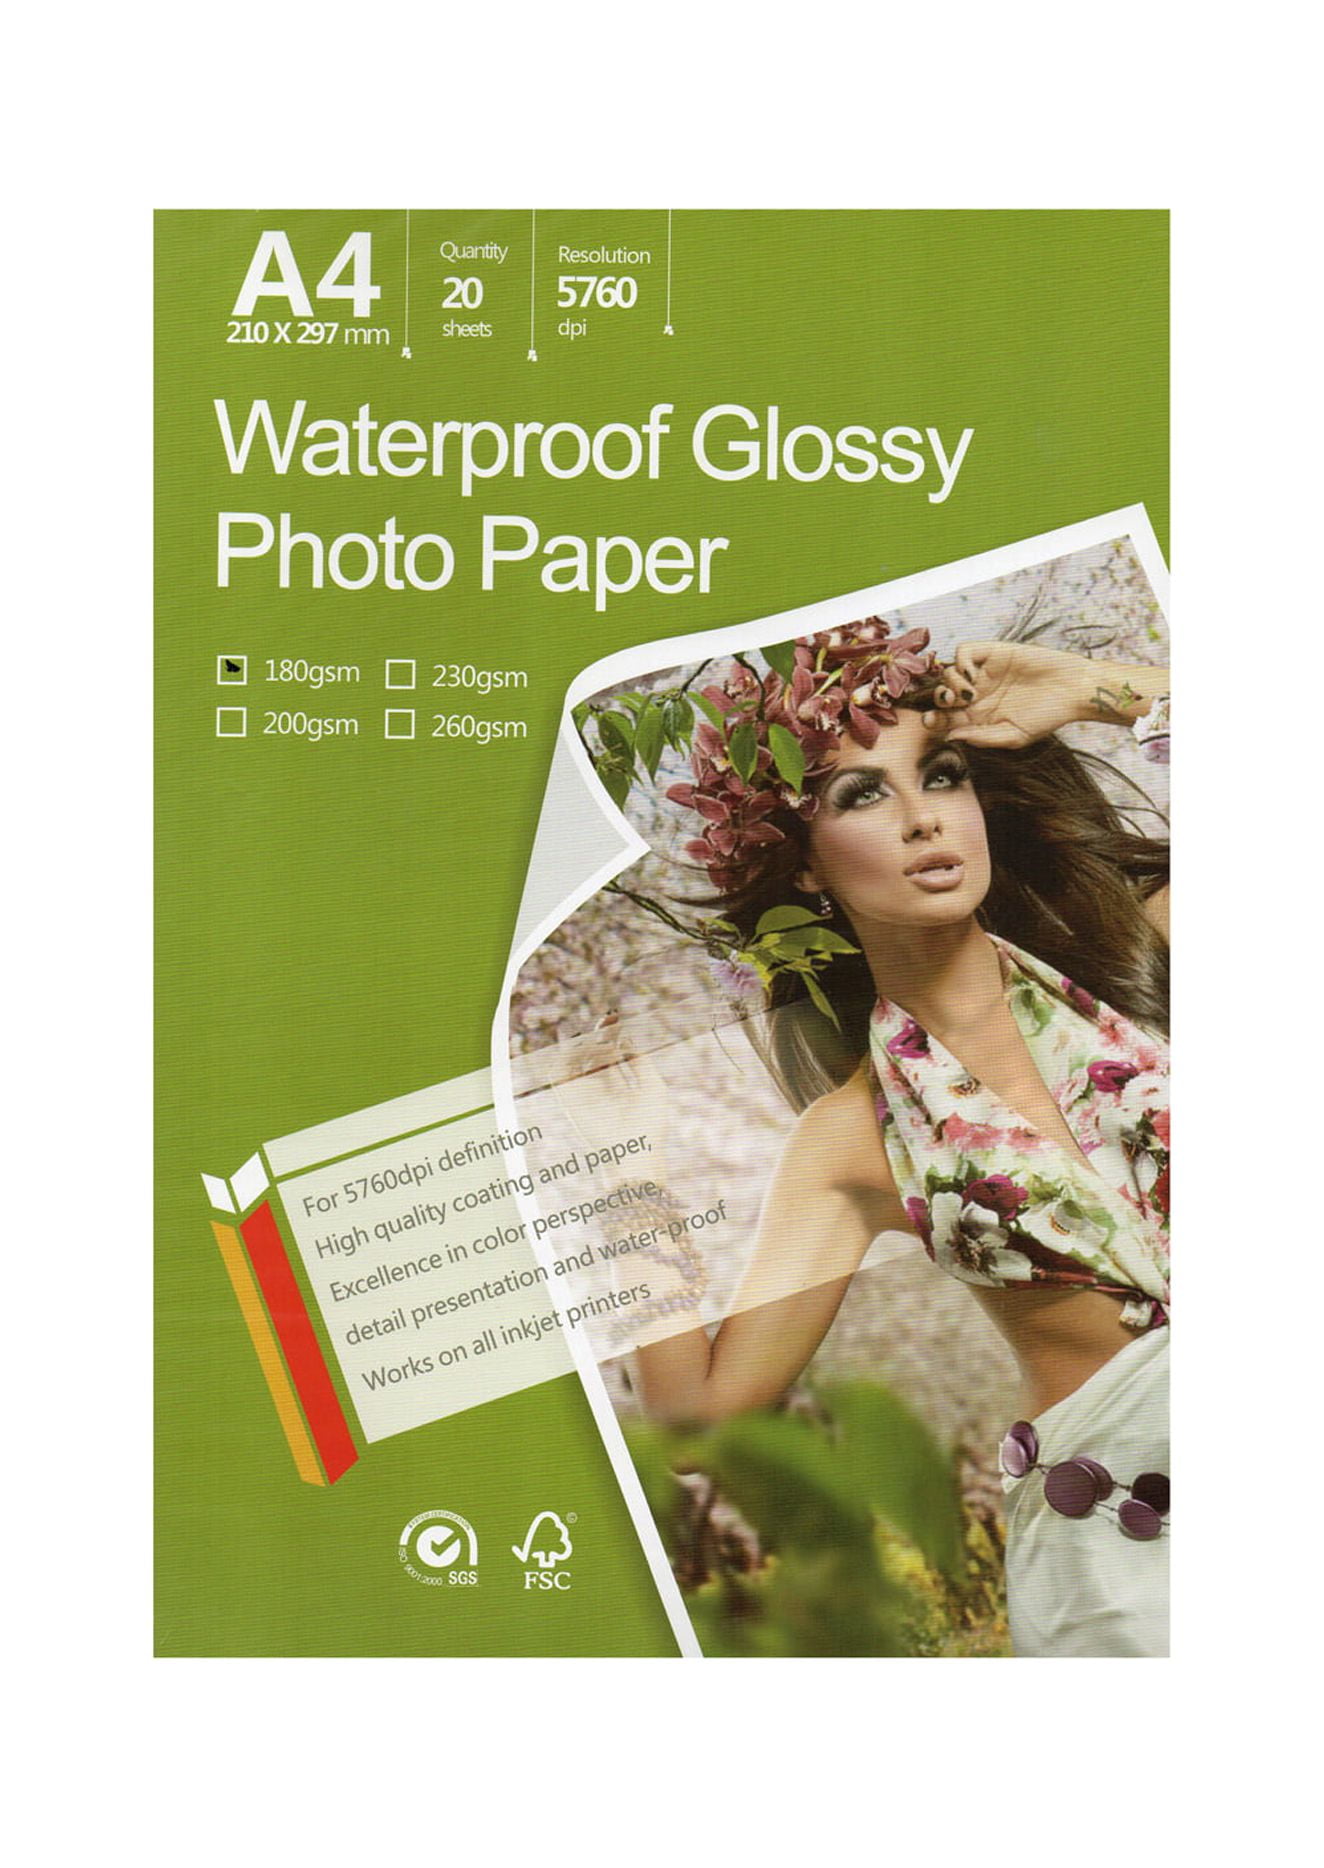 50 sheets Photo Paper Glossy, 8 * 10 inch Photo Paper for Printer Picture,  inkjet printing photo paper 180 gsm, Suitable for flyers, calendars and